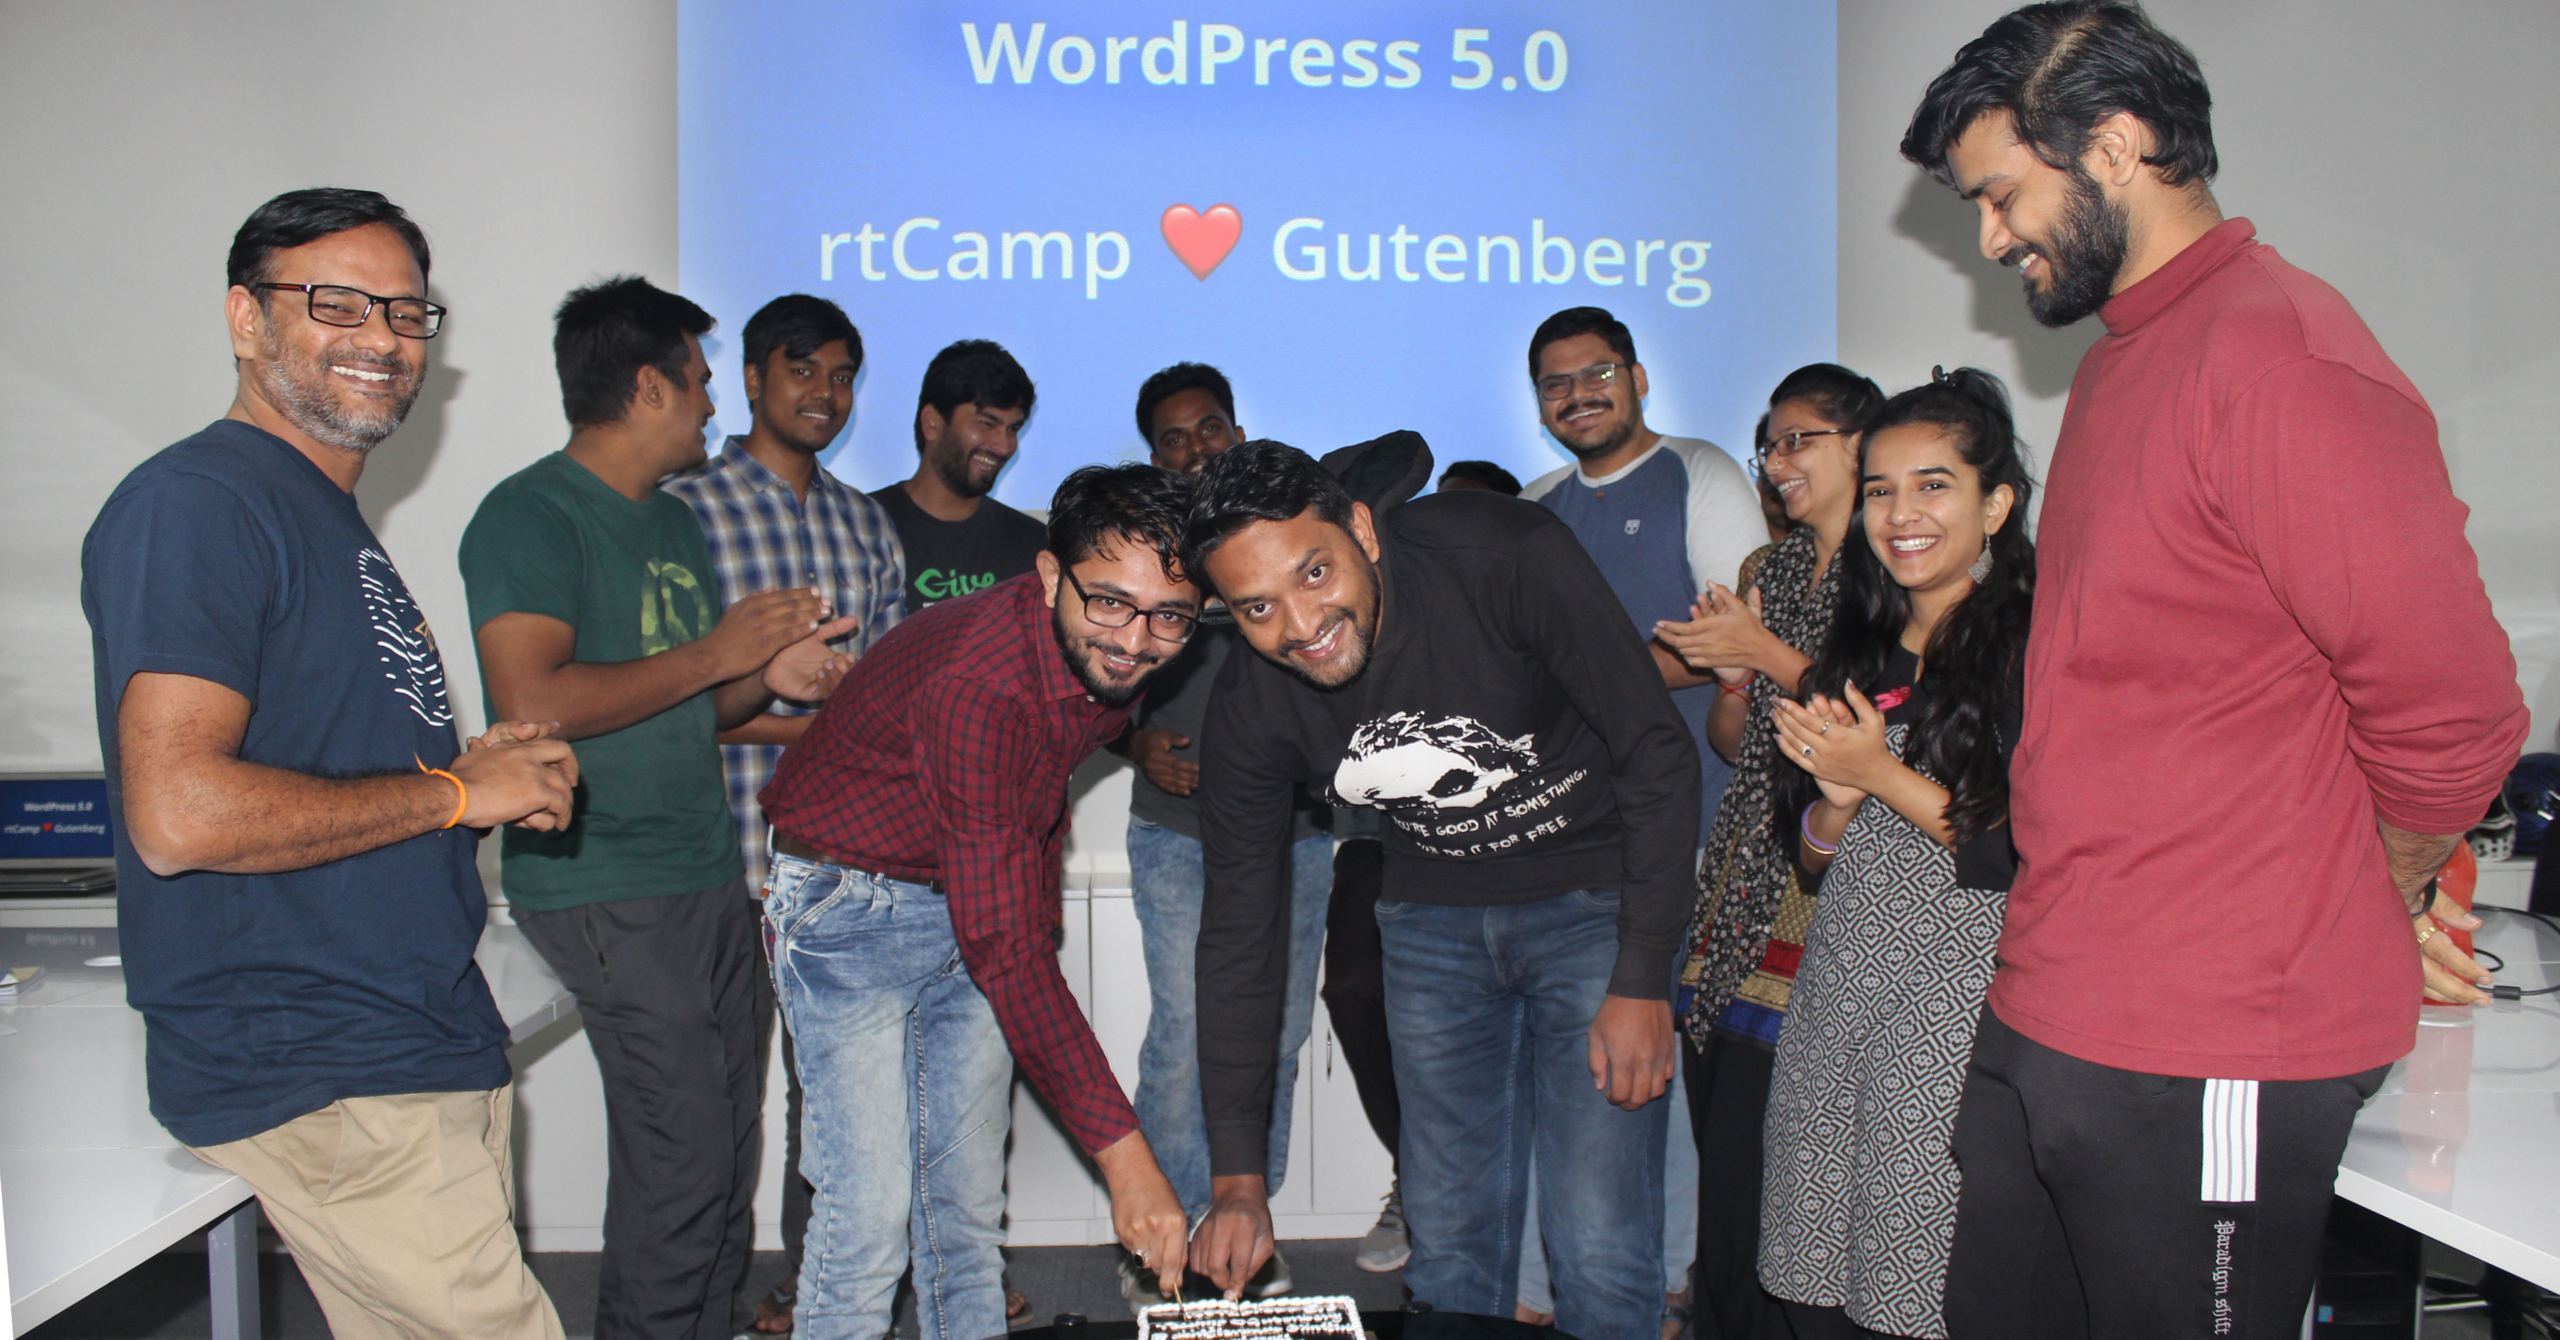 rtCampers celebrating the release of WordPress 5.0 with the traditional cake cutting ceremony.